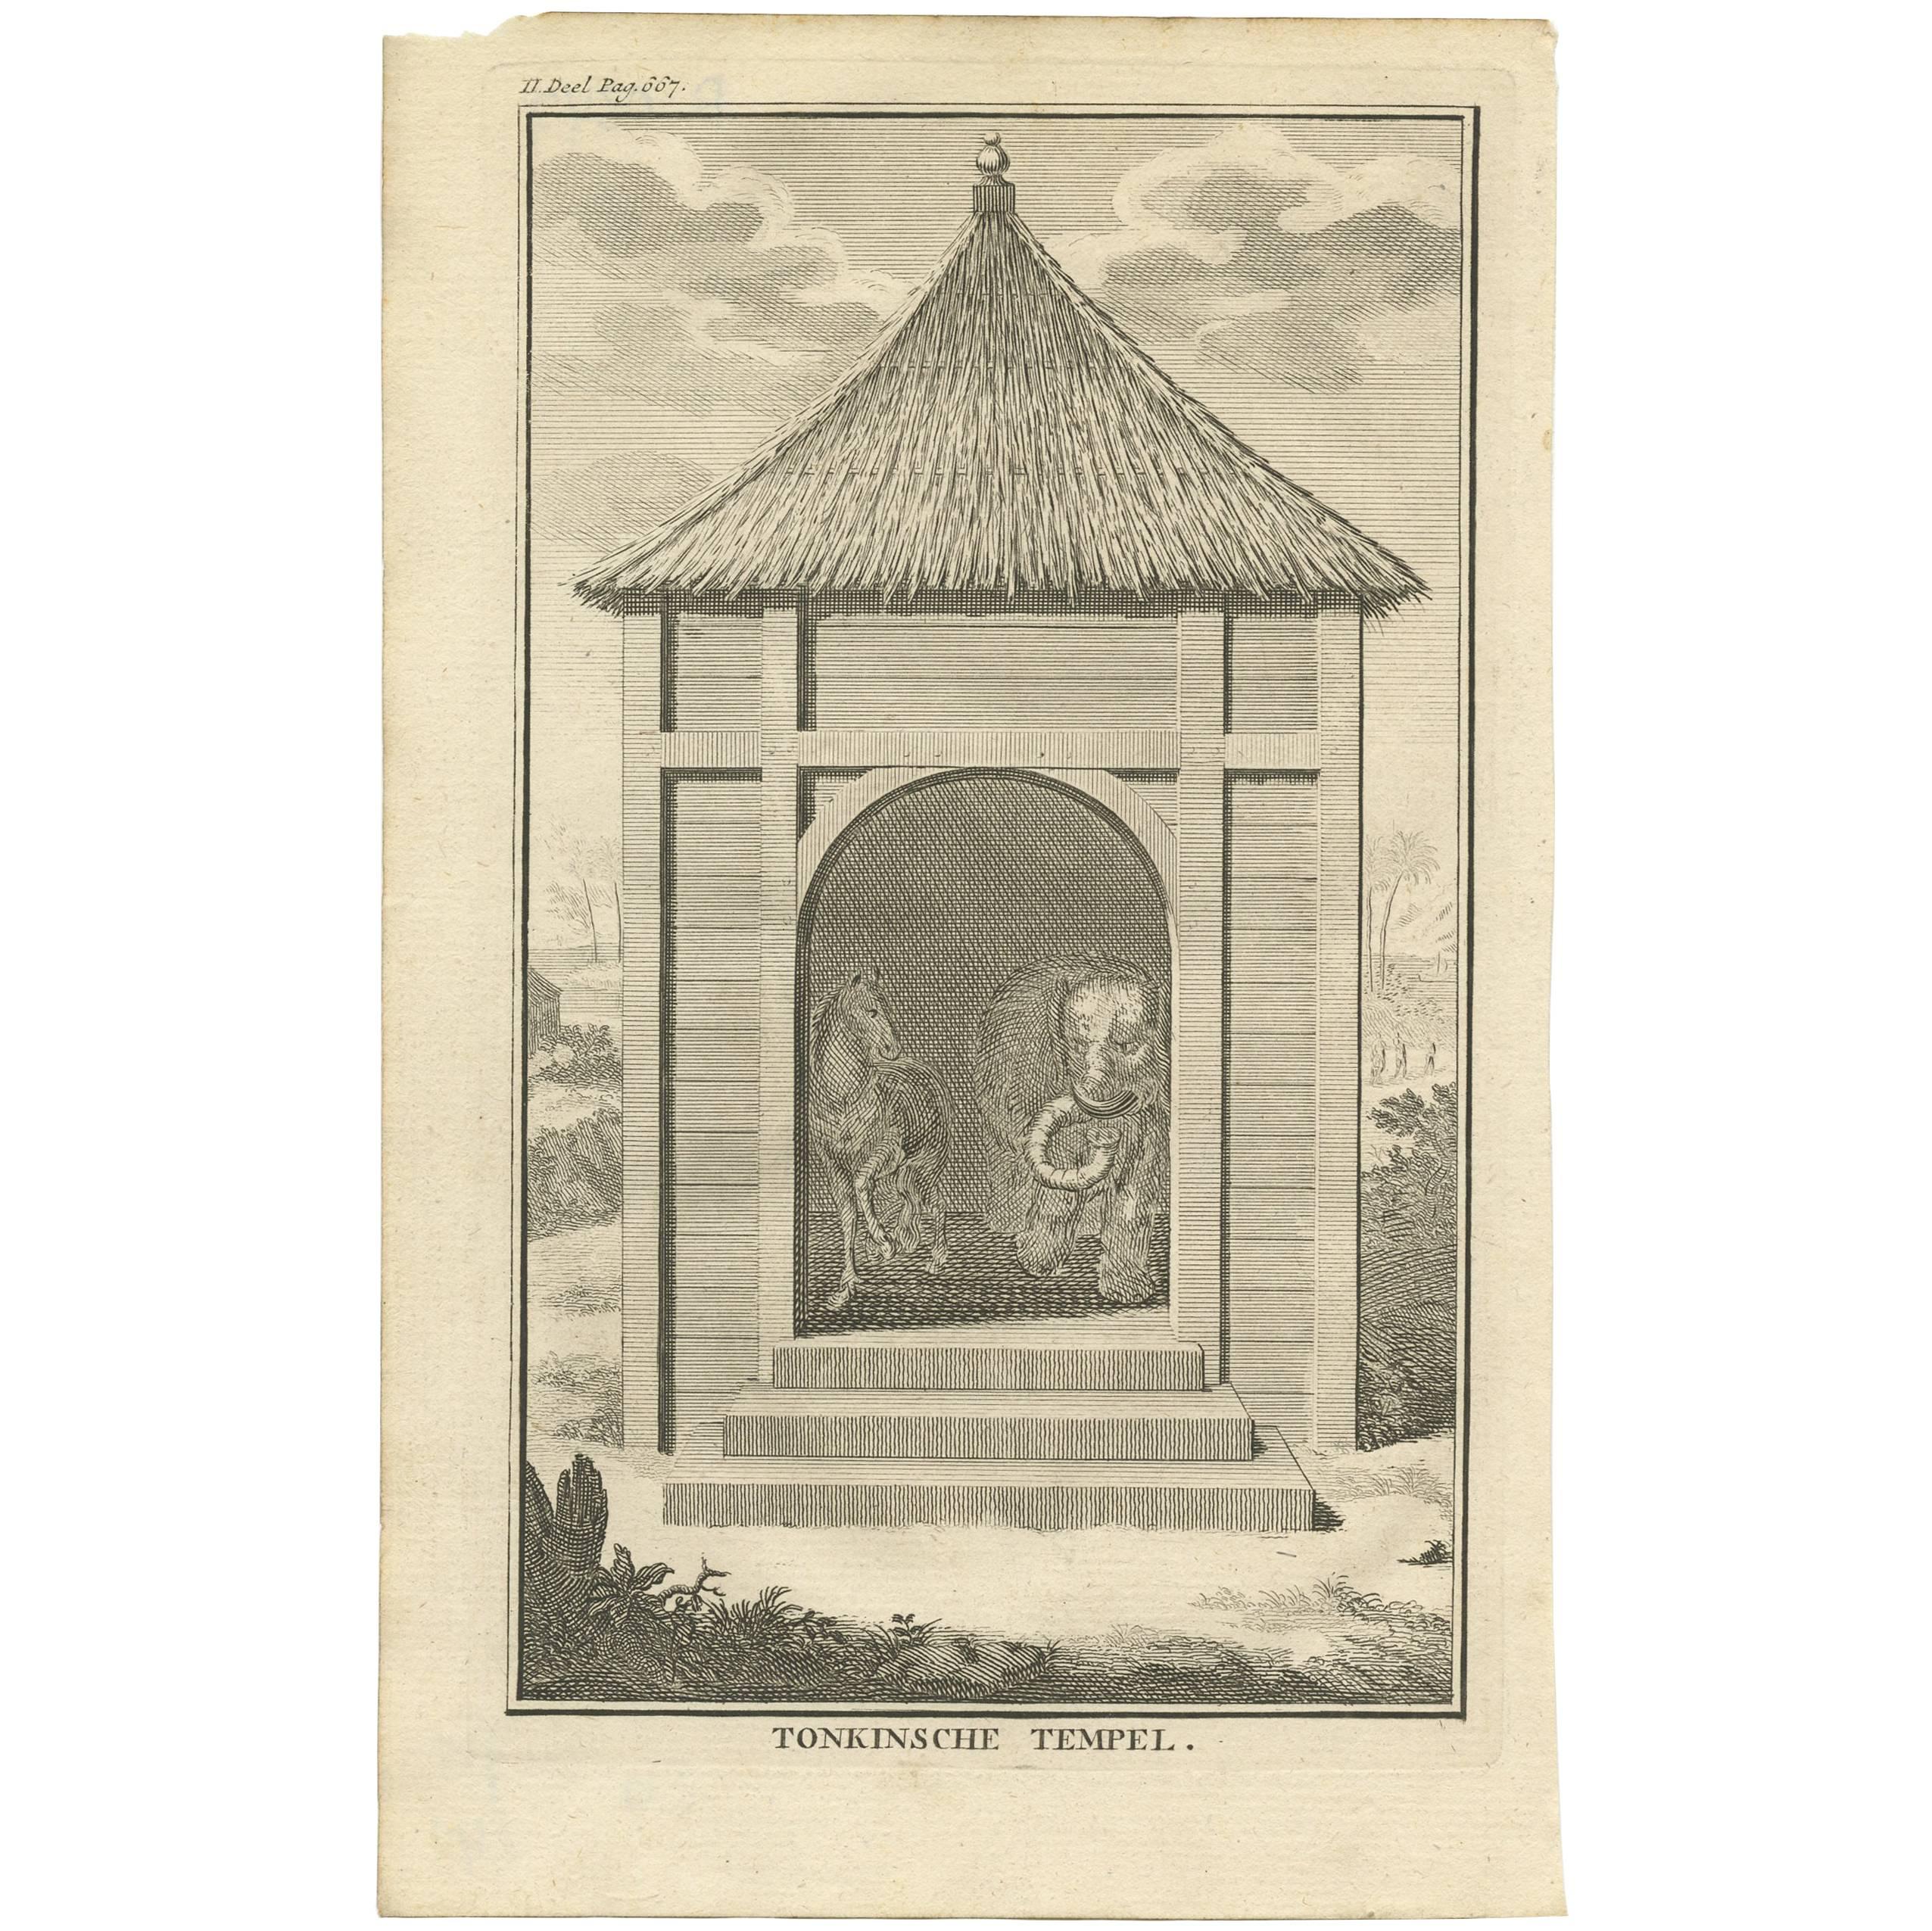 Antique Print of a Tonkin or Vietnam Temple by I. Tirion, 1739